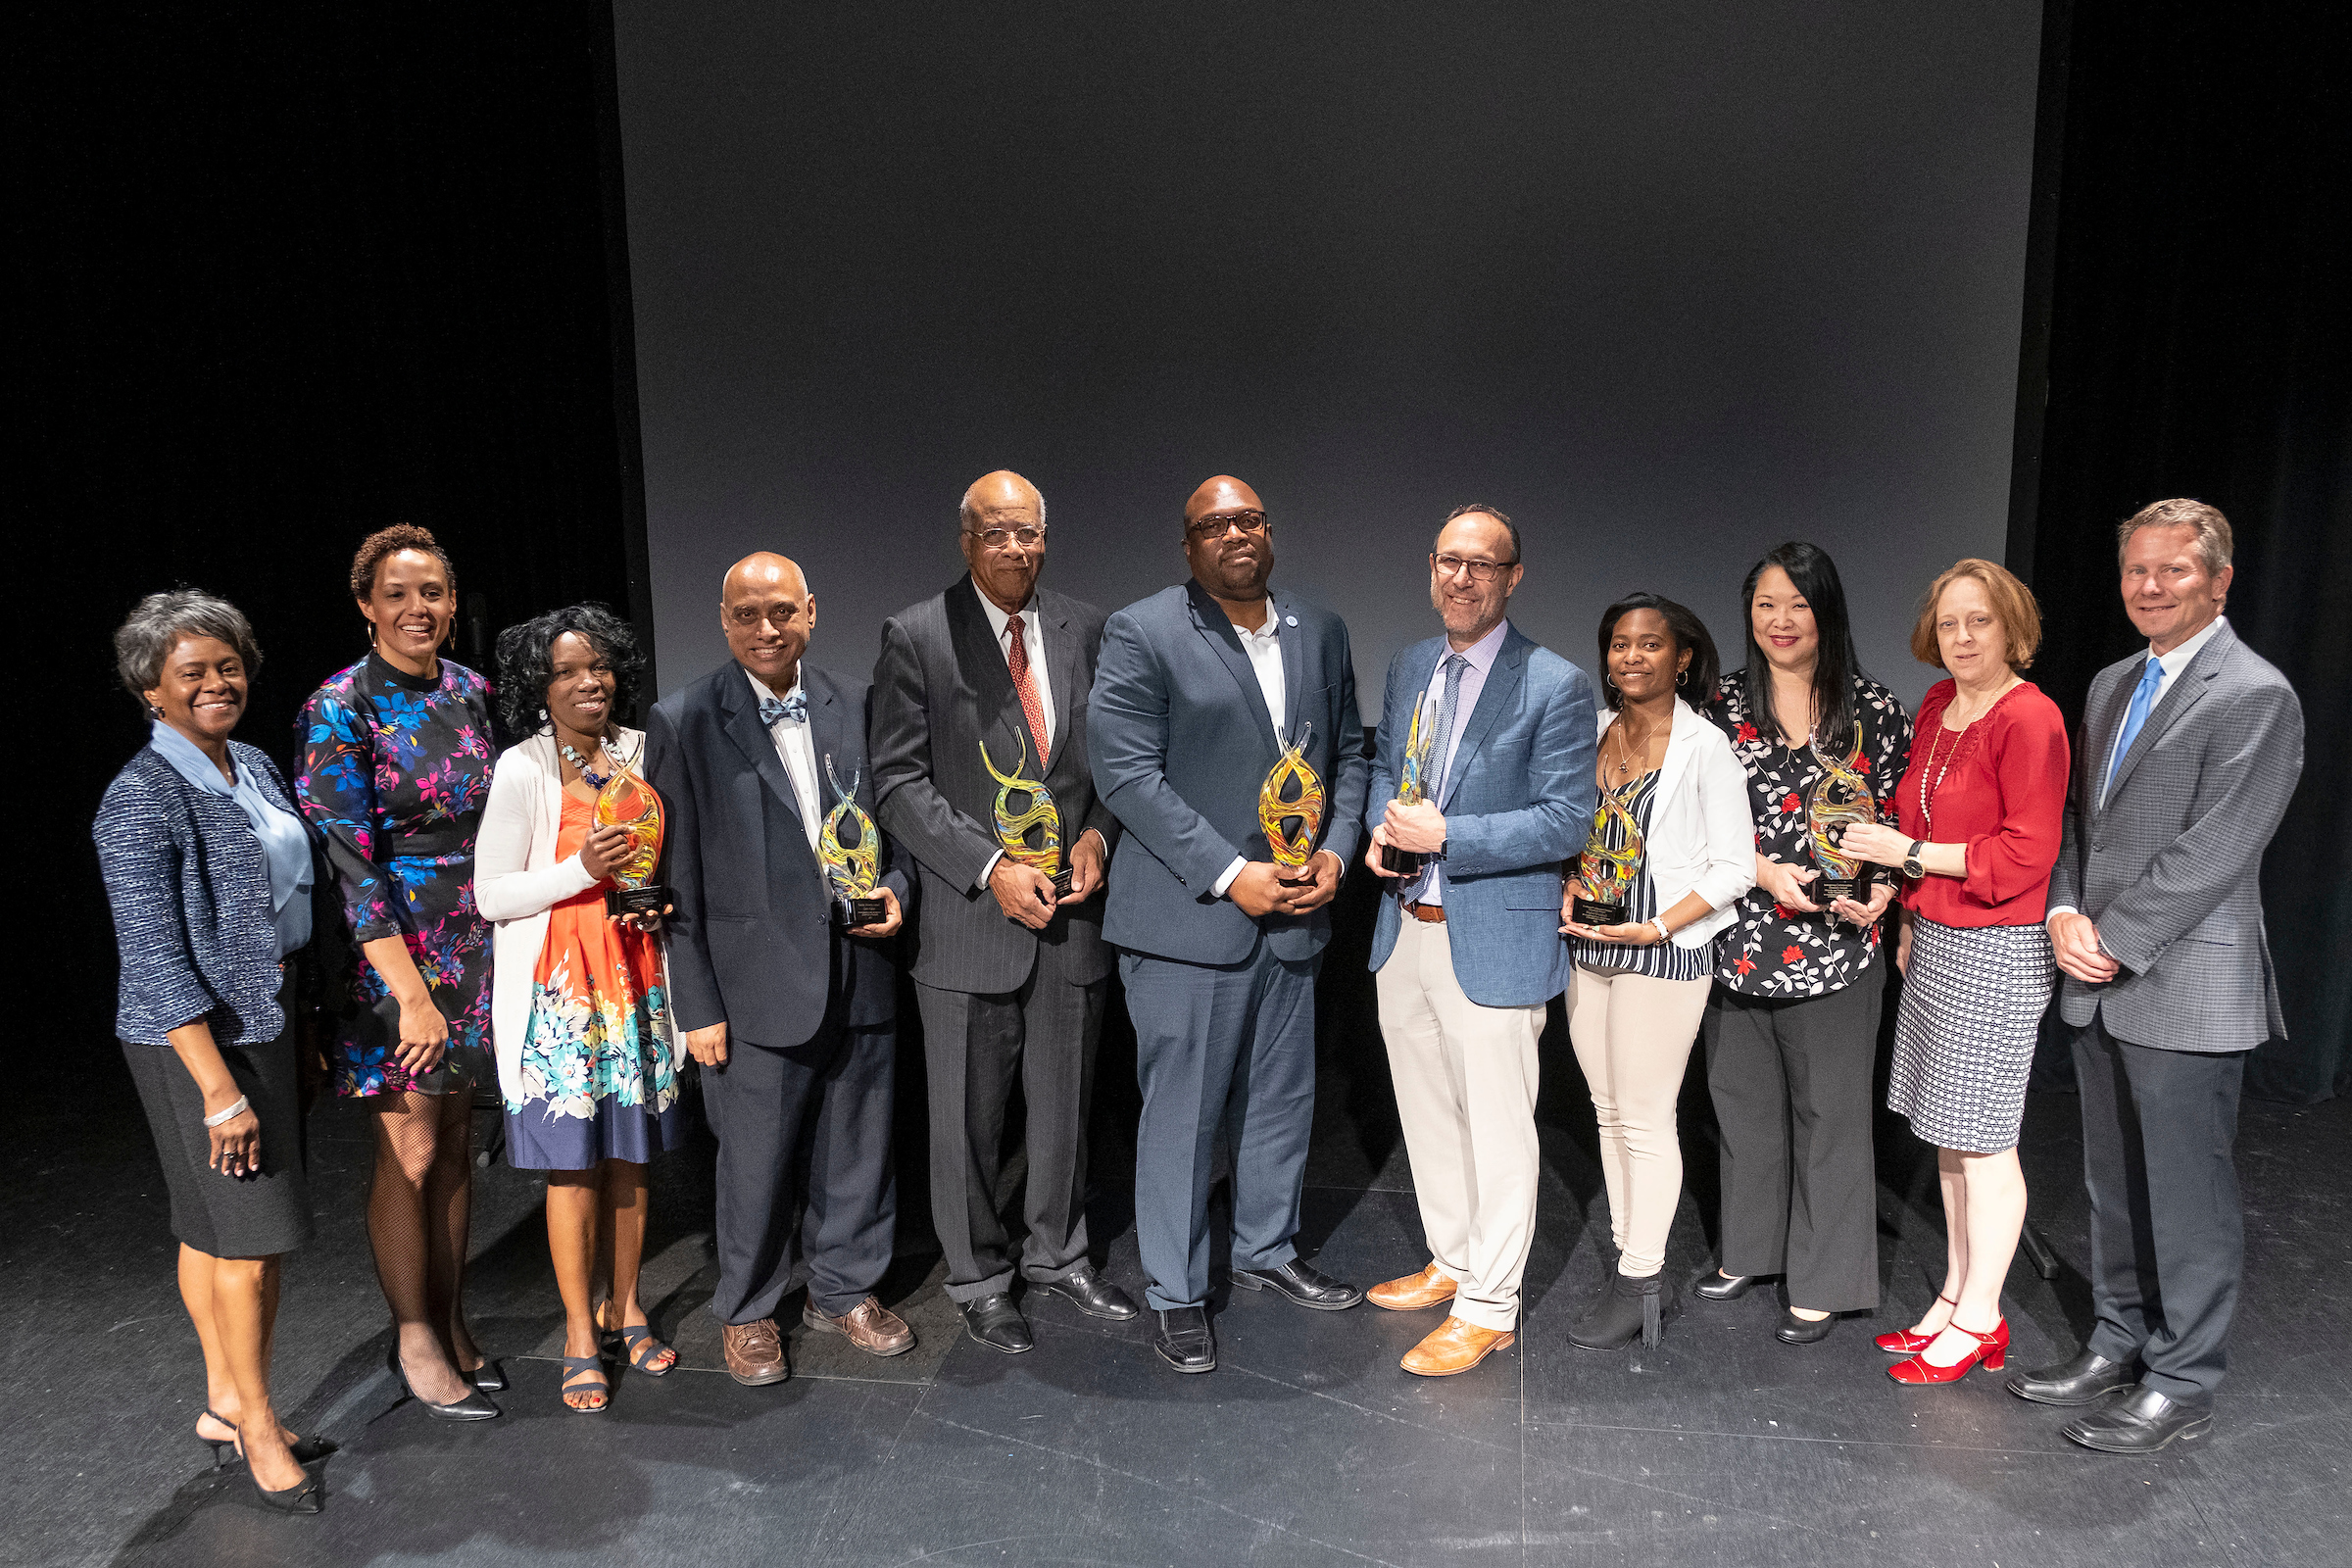 Winners of the 2019 Diversity Awards pose with their awards on stage during the ceremony.